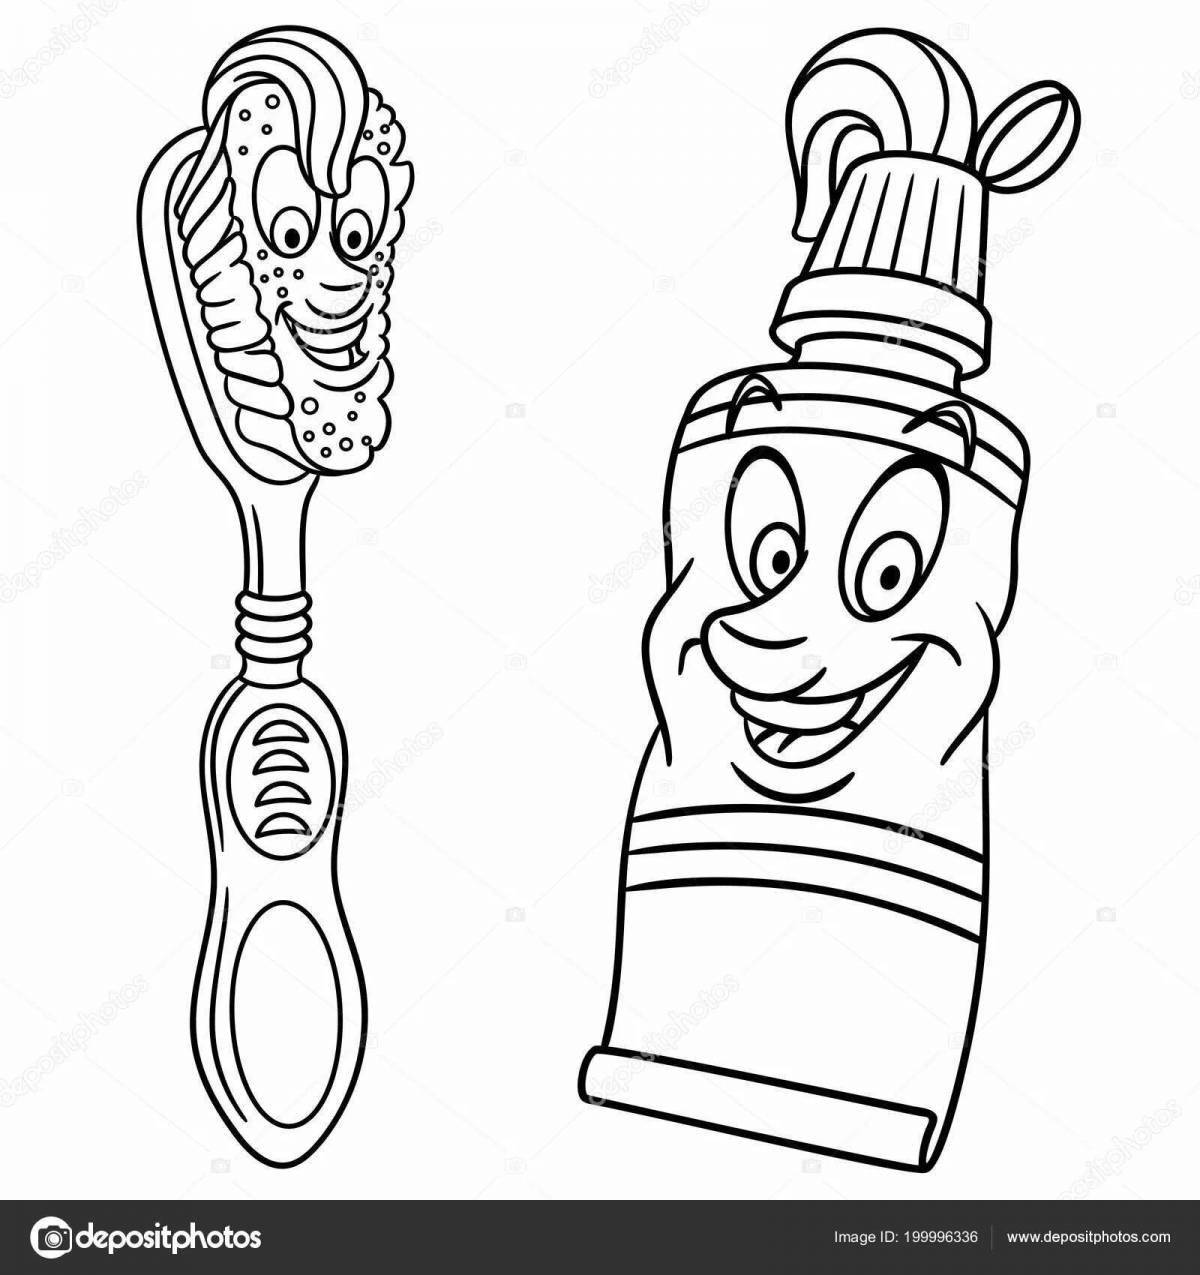 Attractive toothbrush and toothpaste coloring page